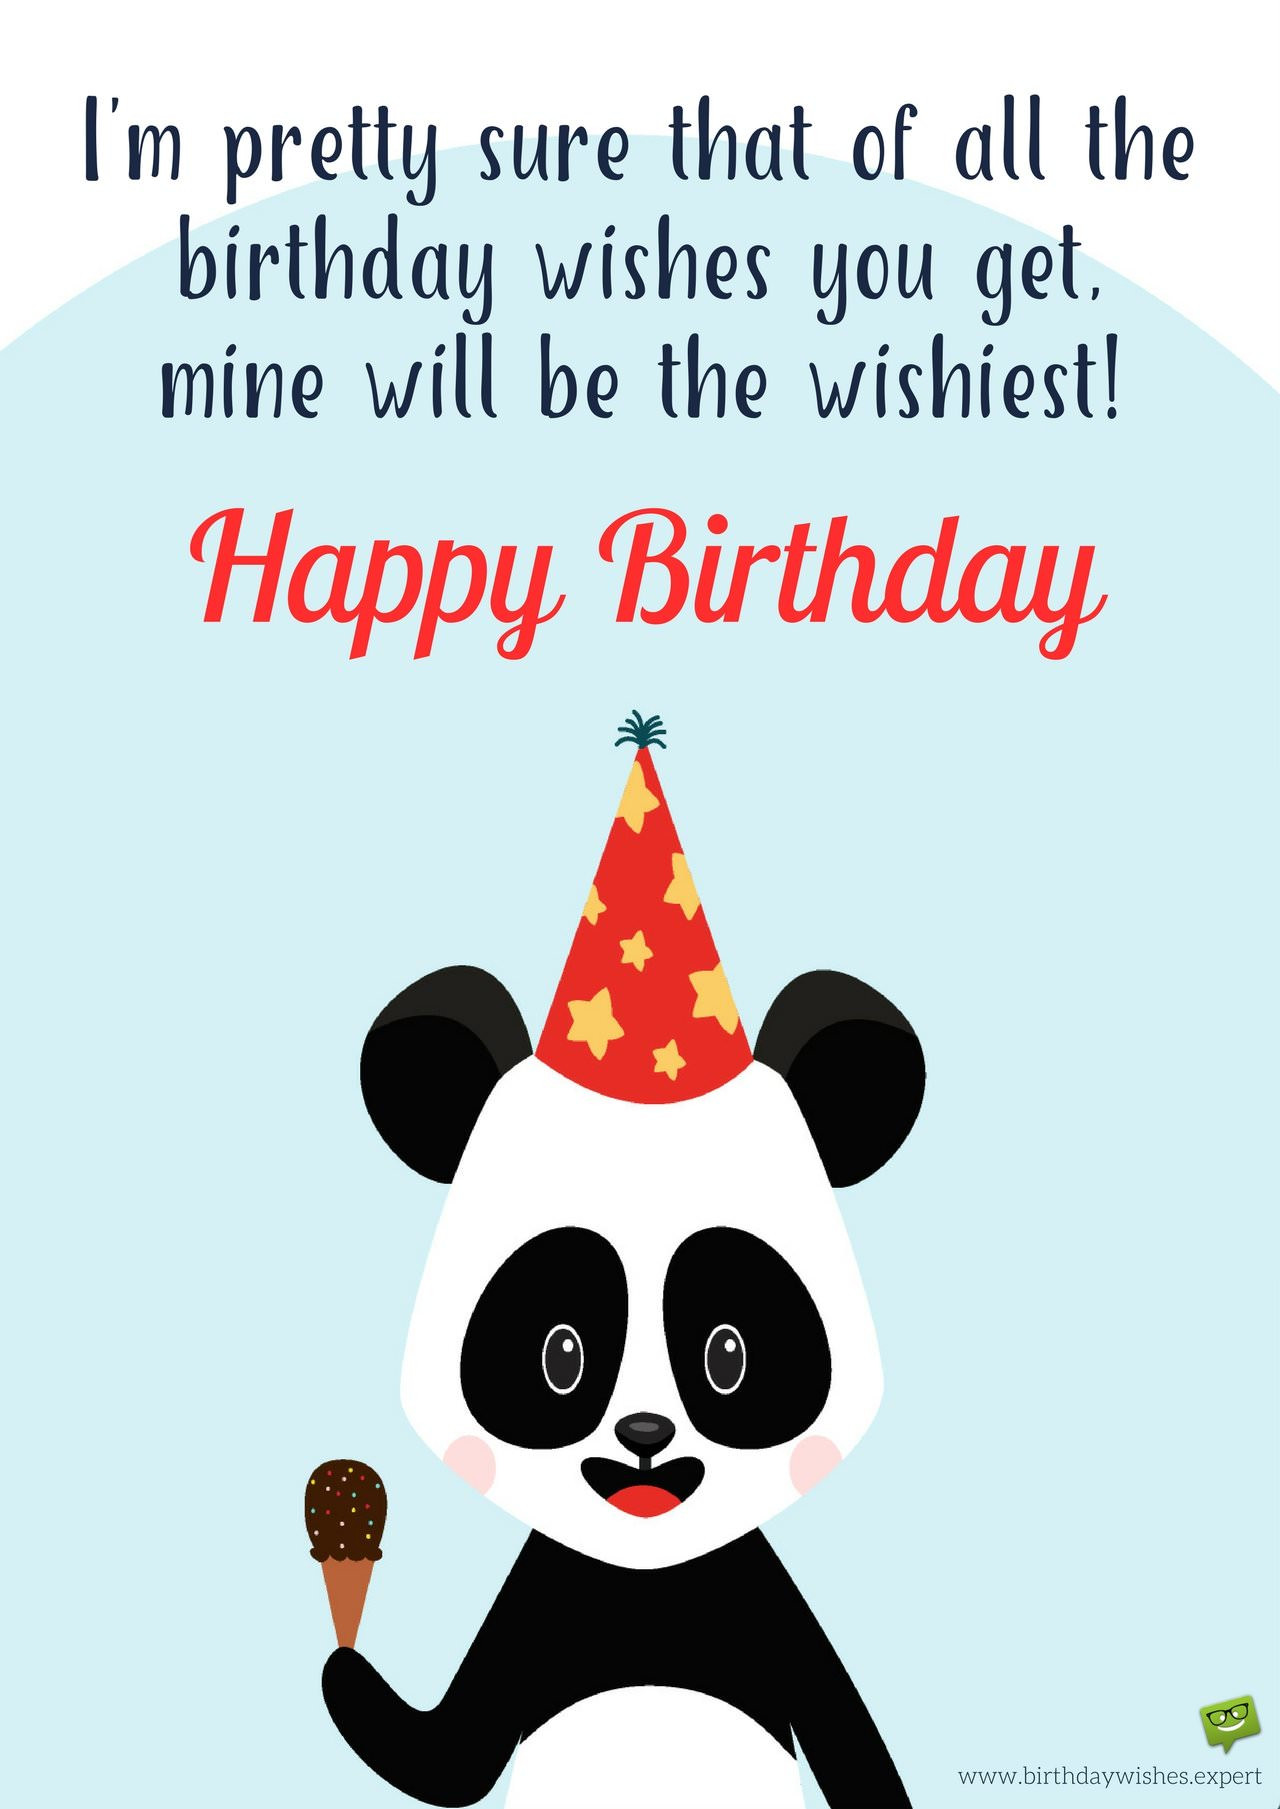 Funny Quotes Birthday Wishes
 The Funniest Wishes to Make your Wife Smile on her Birthday